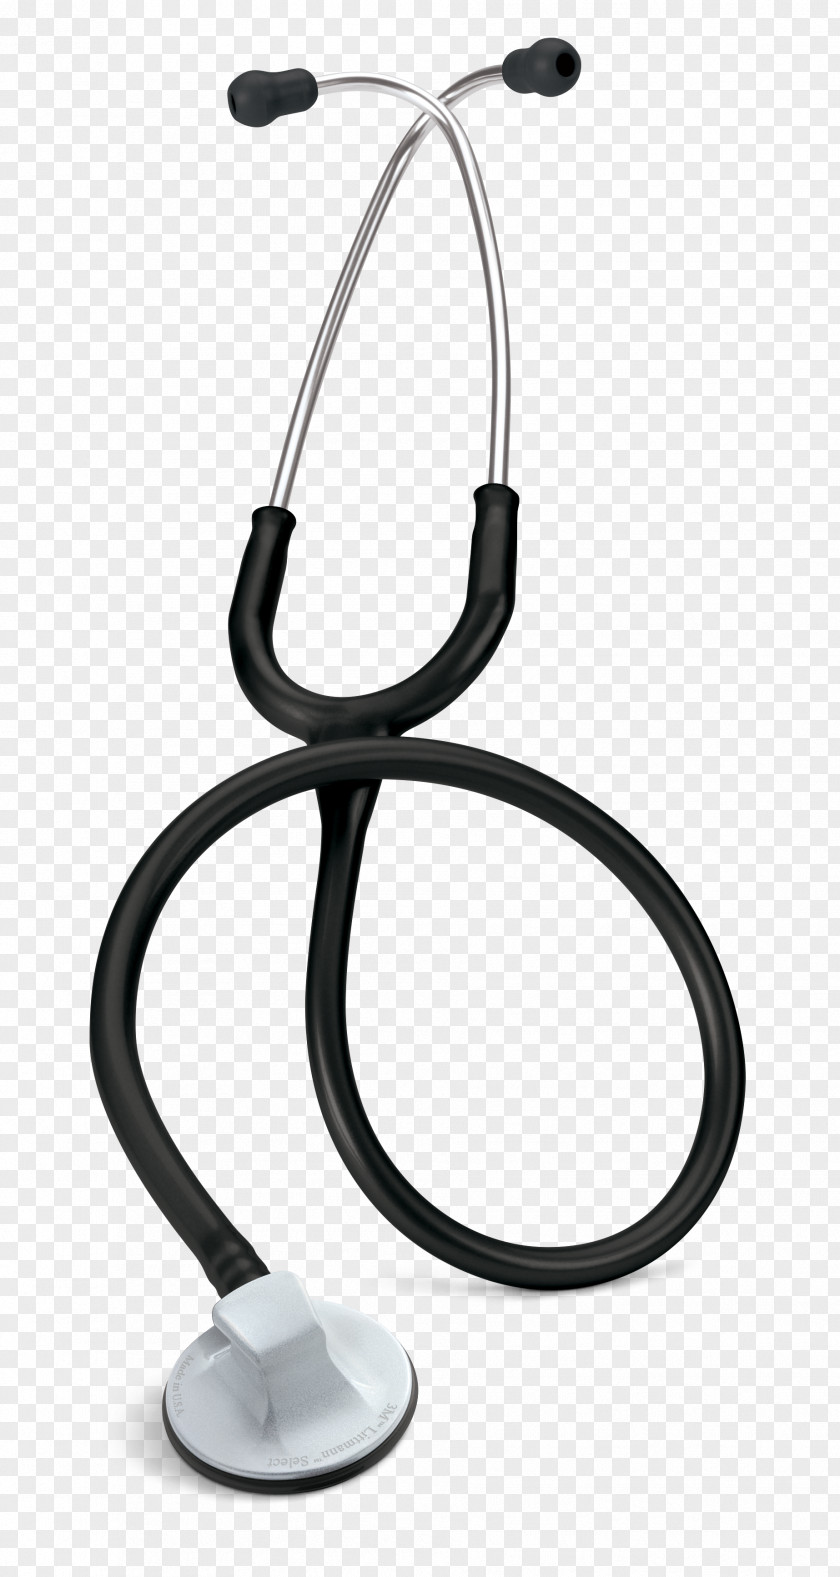 Heart Stethoscope Cardiology Medicine Physical Examination PNG